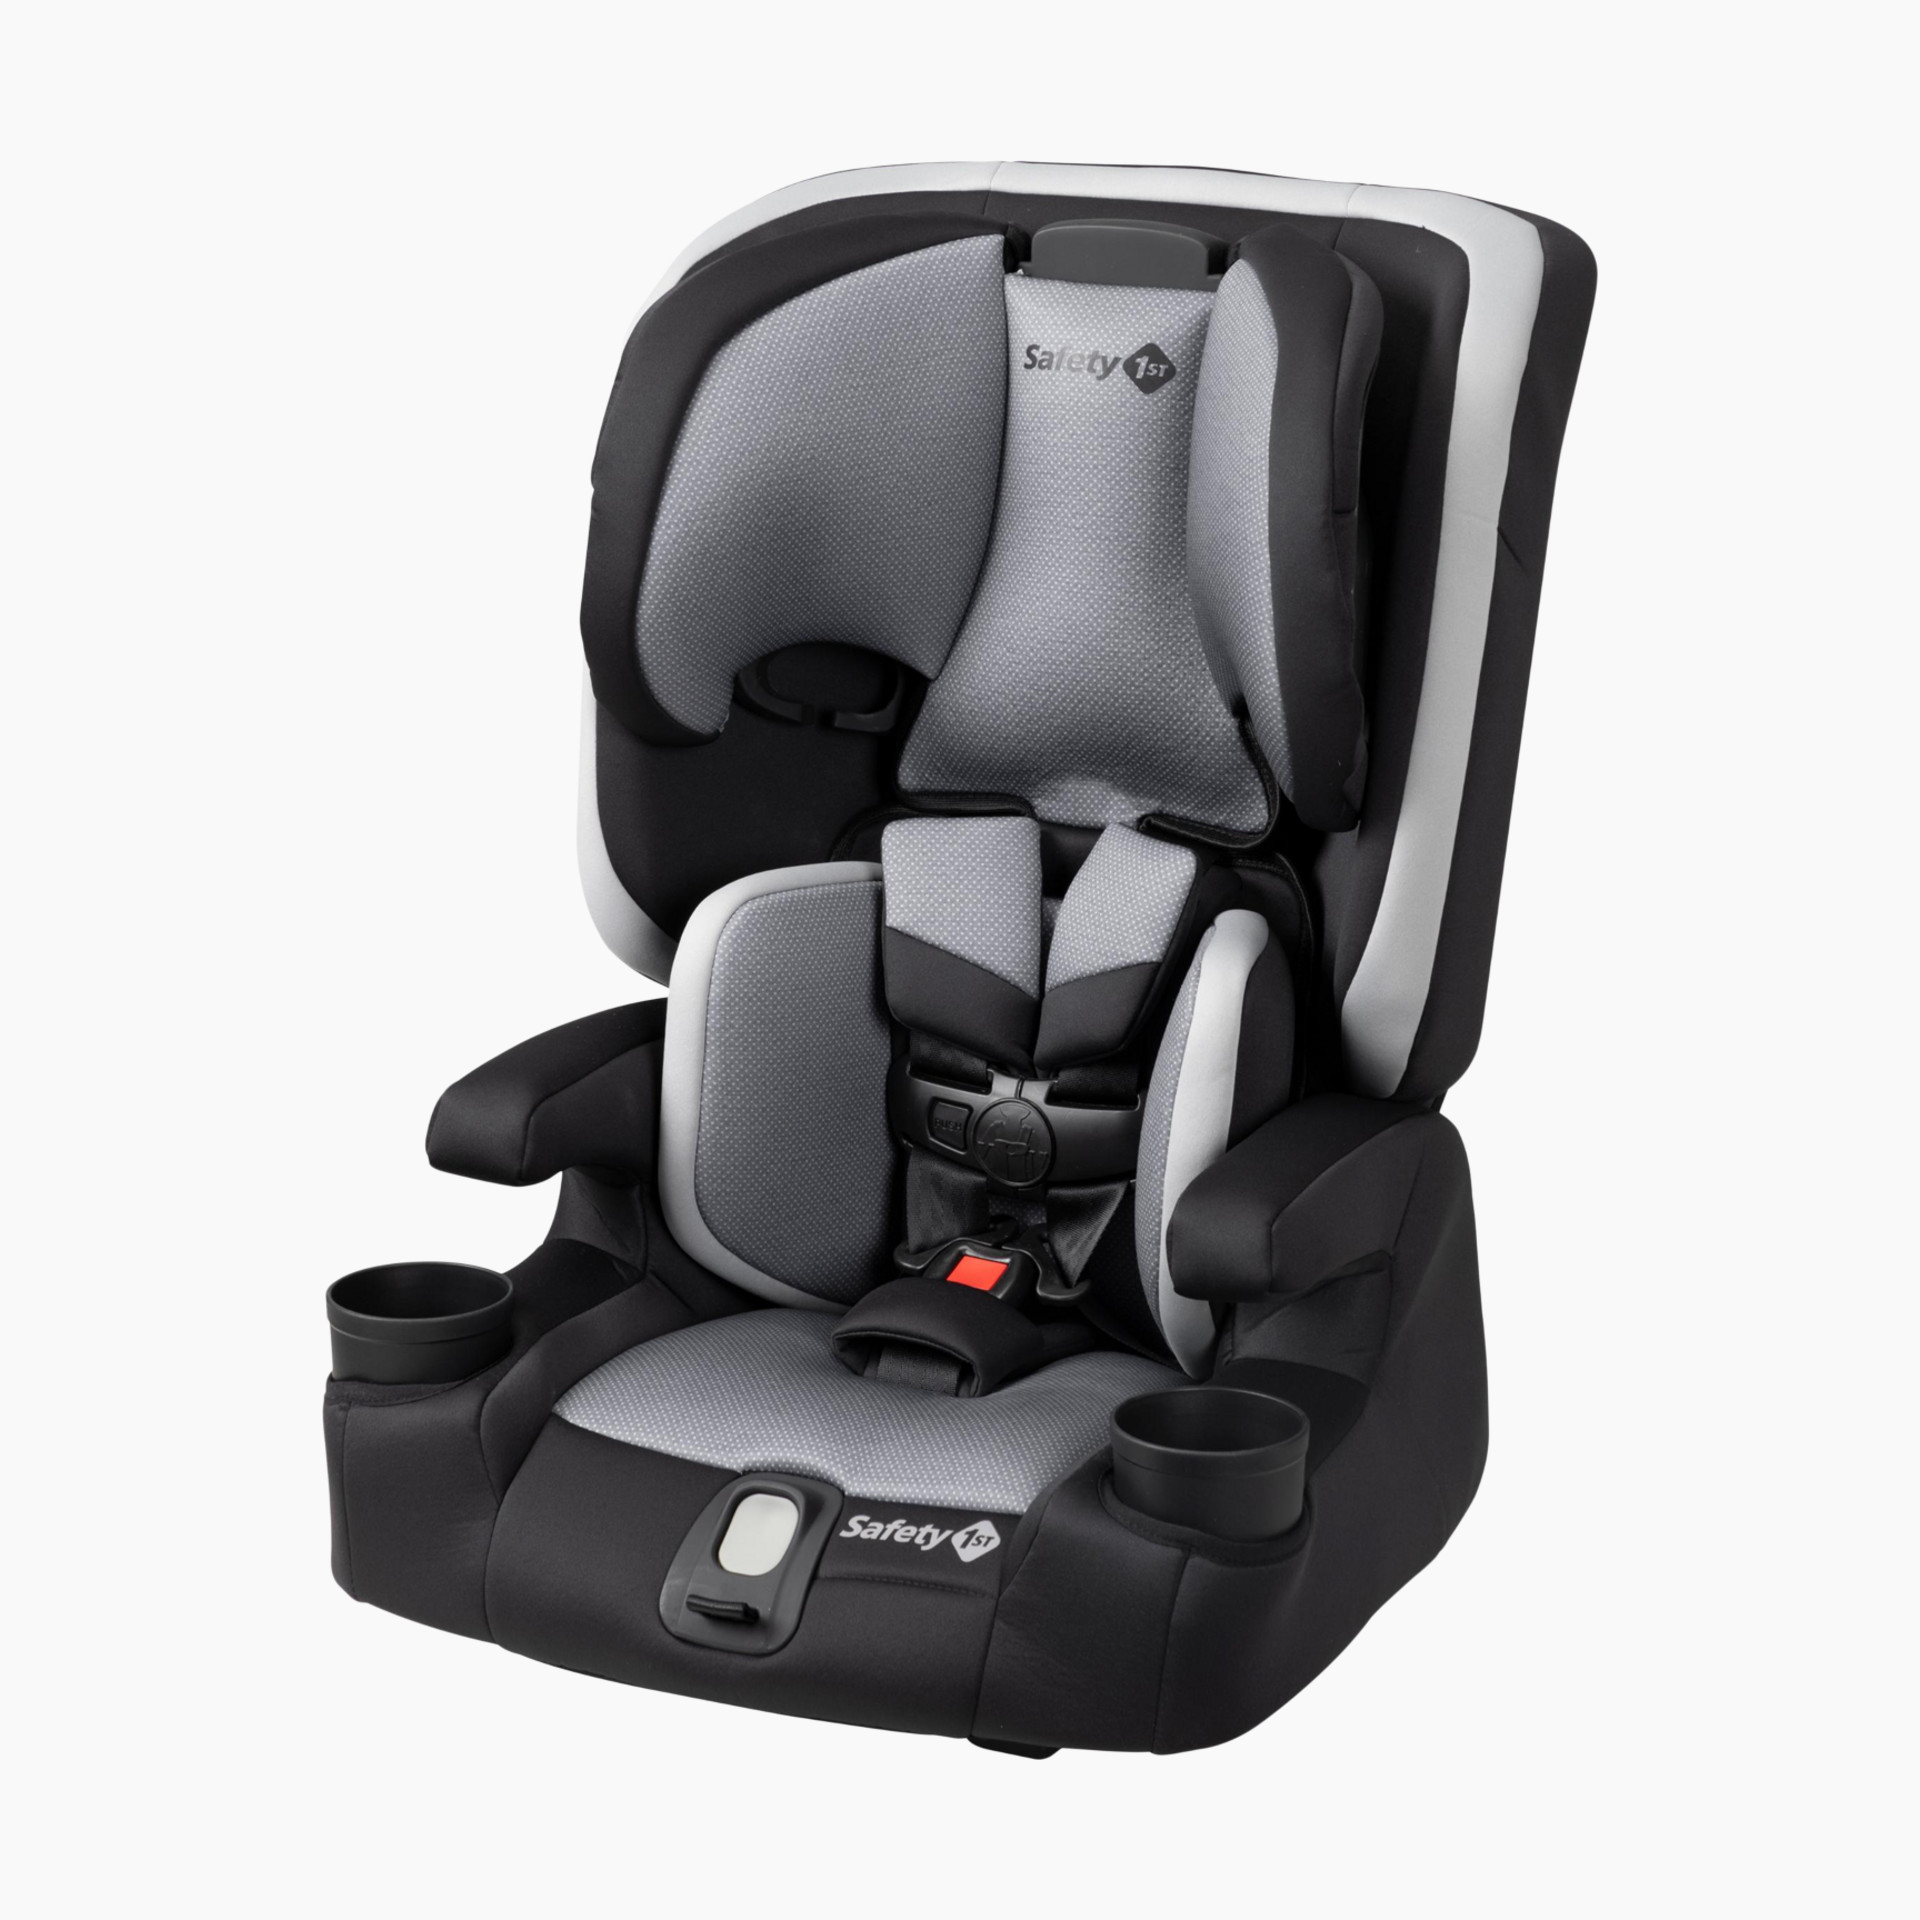 Safety 1 Comfort Ride Lite Booster Car Seat, Pure Black